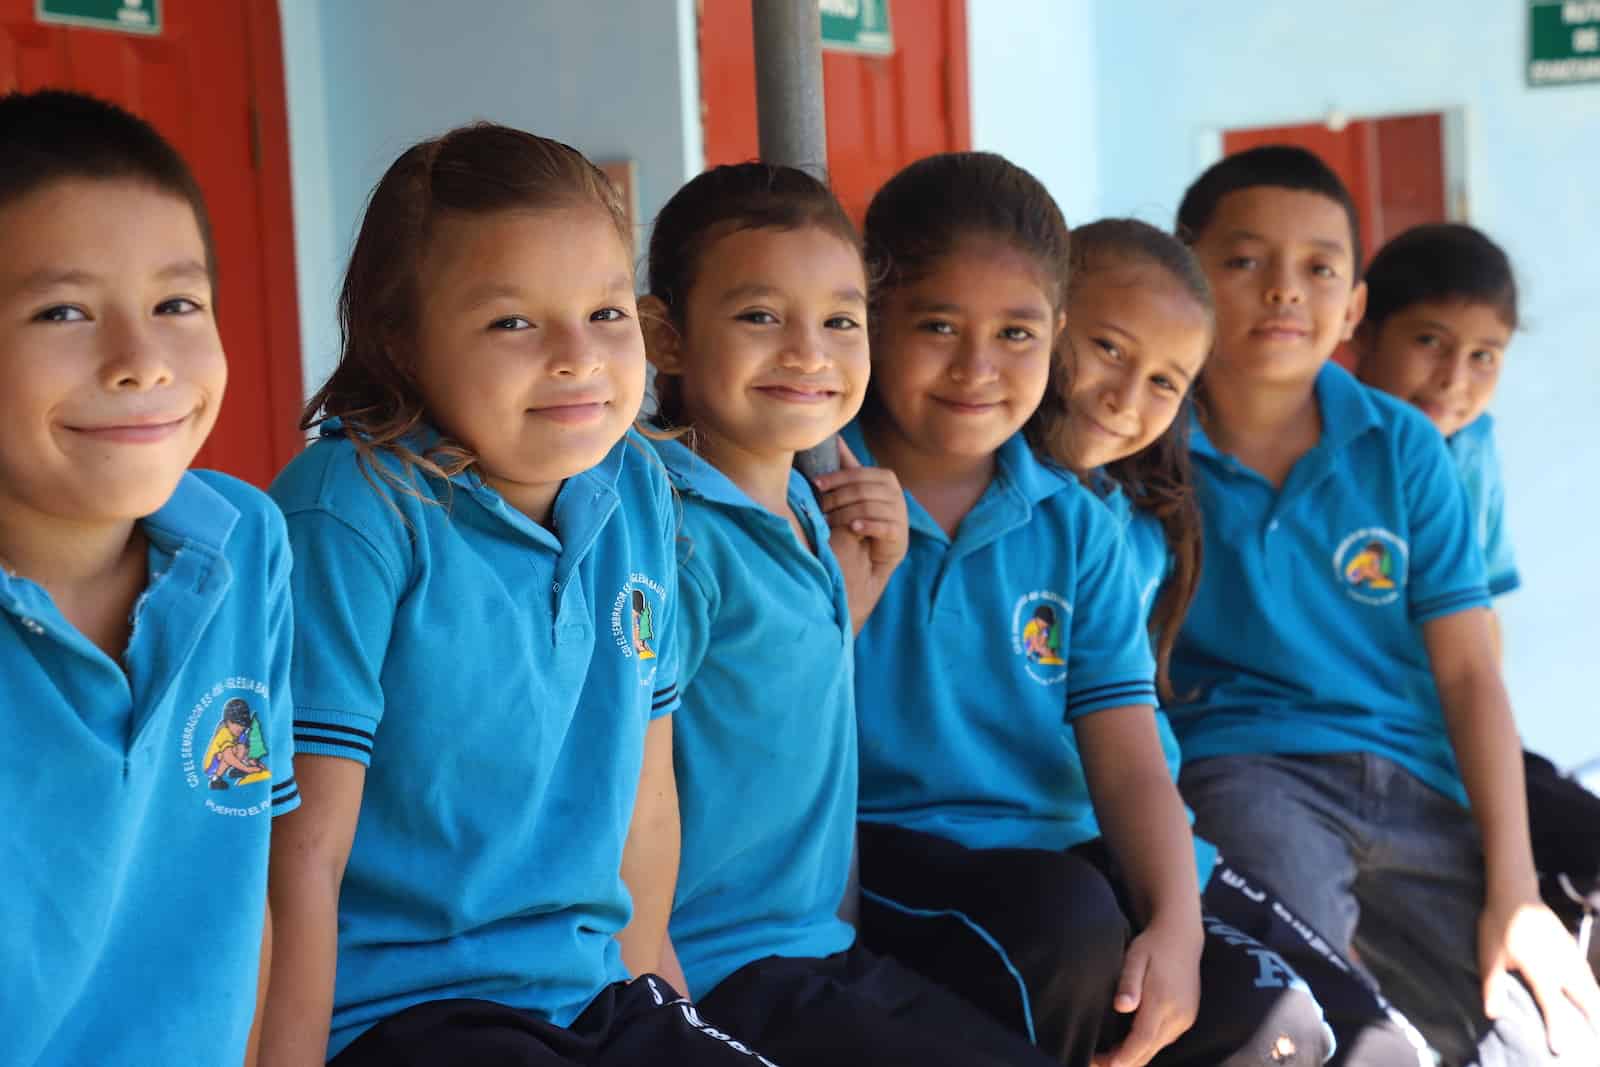 Children in blue shirts sit on a porch together.